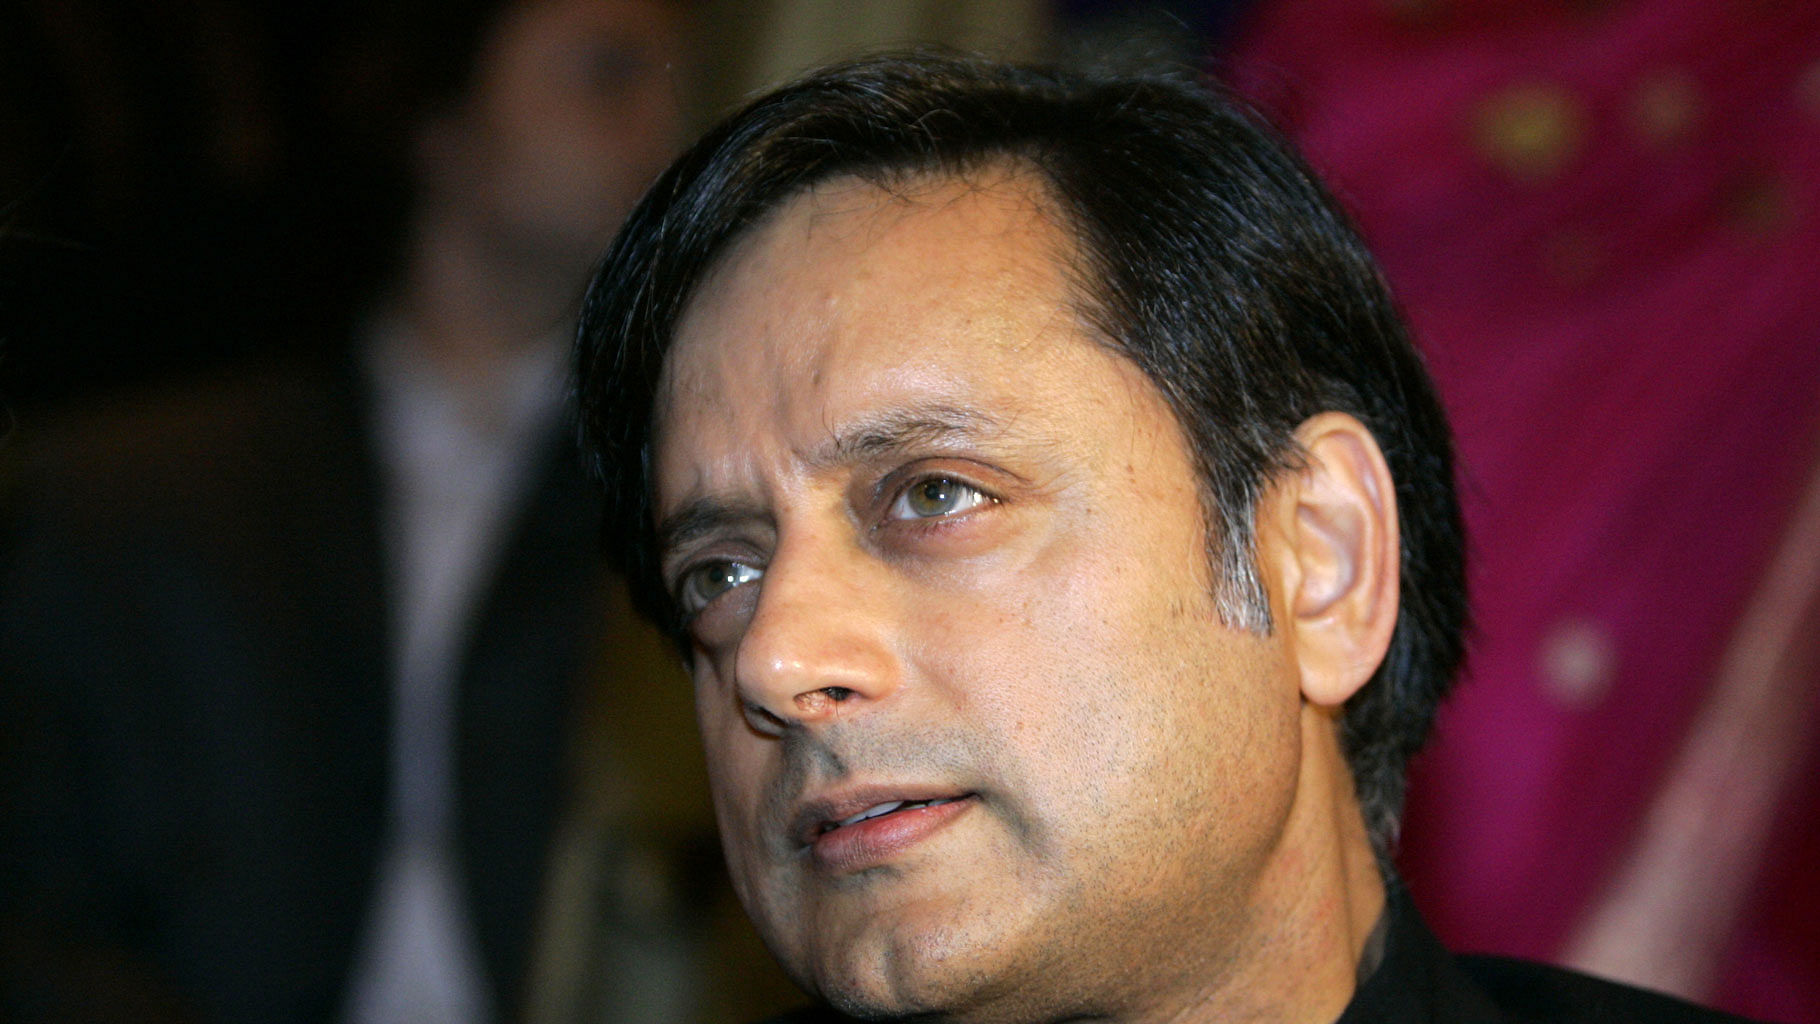 A Delhi court sent Sunanda Pushkar’s death case against Shashi Tharoor to a Sessions court for further proceedings.&nbsp;